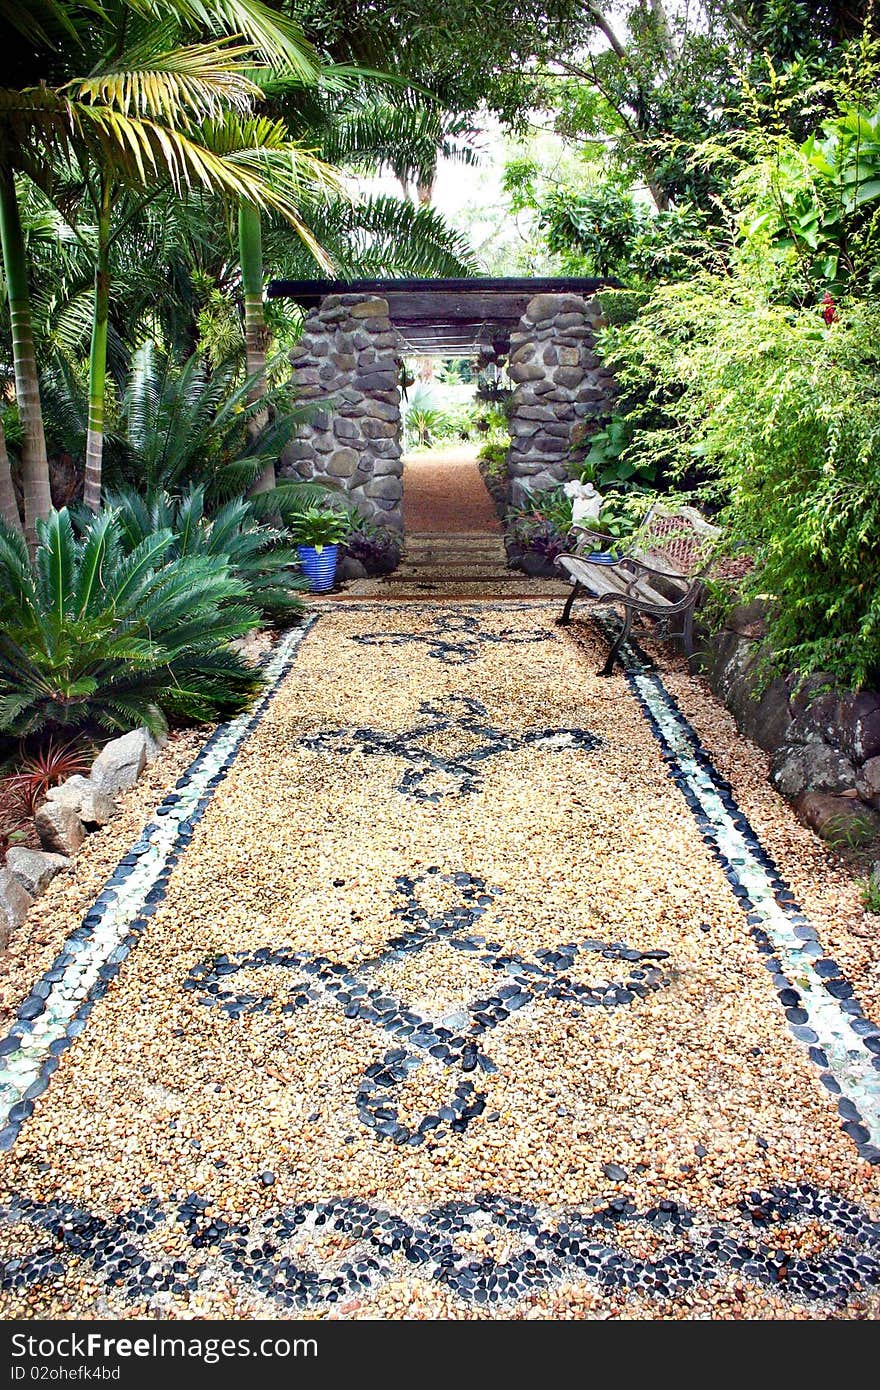 Patterned garden path with stone inlay. Patterned garden path with stone inlay